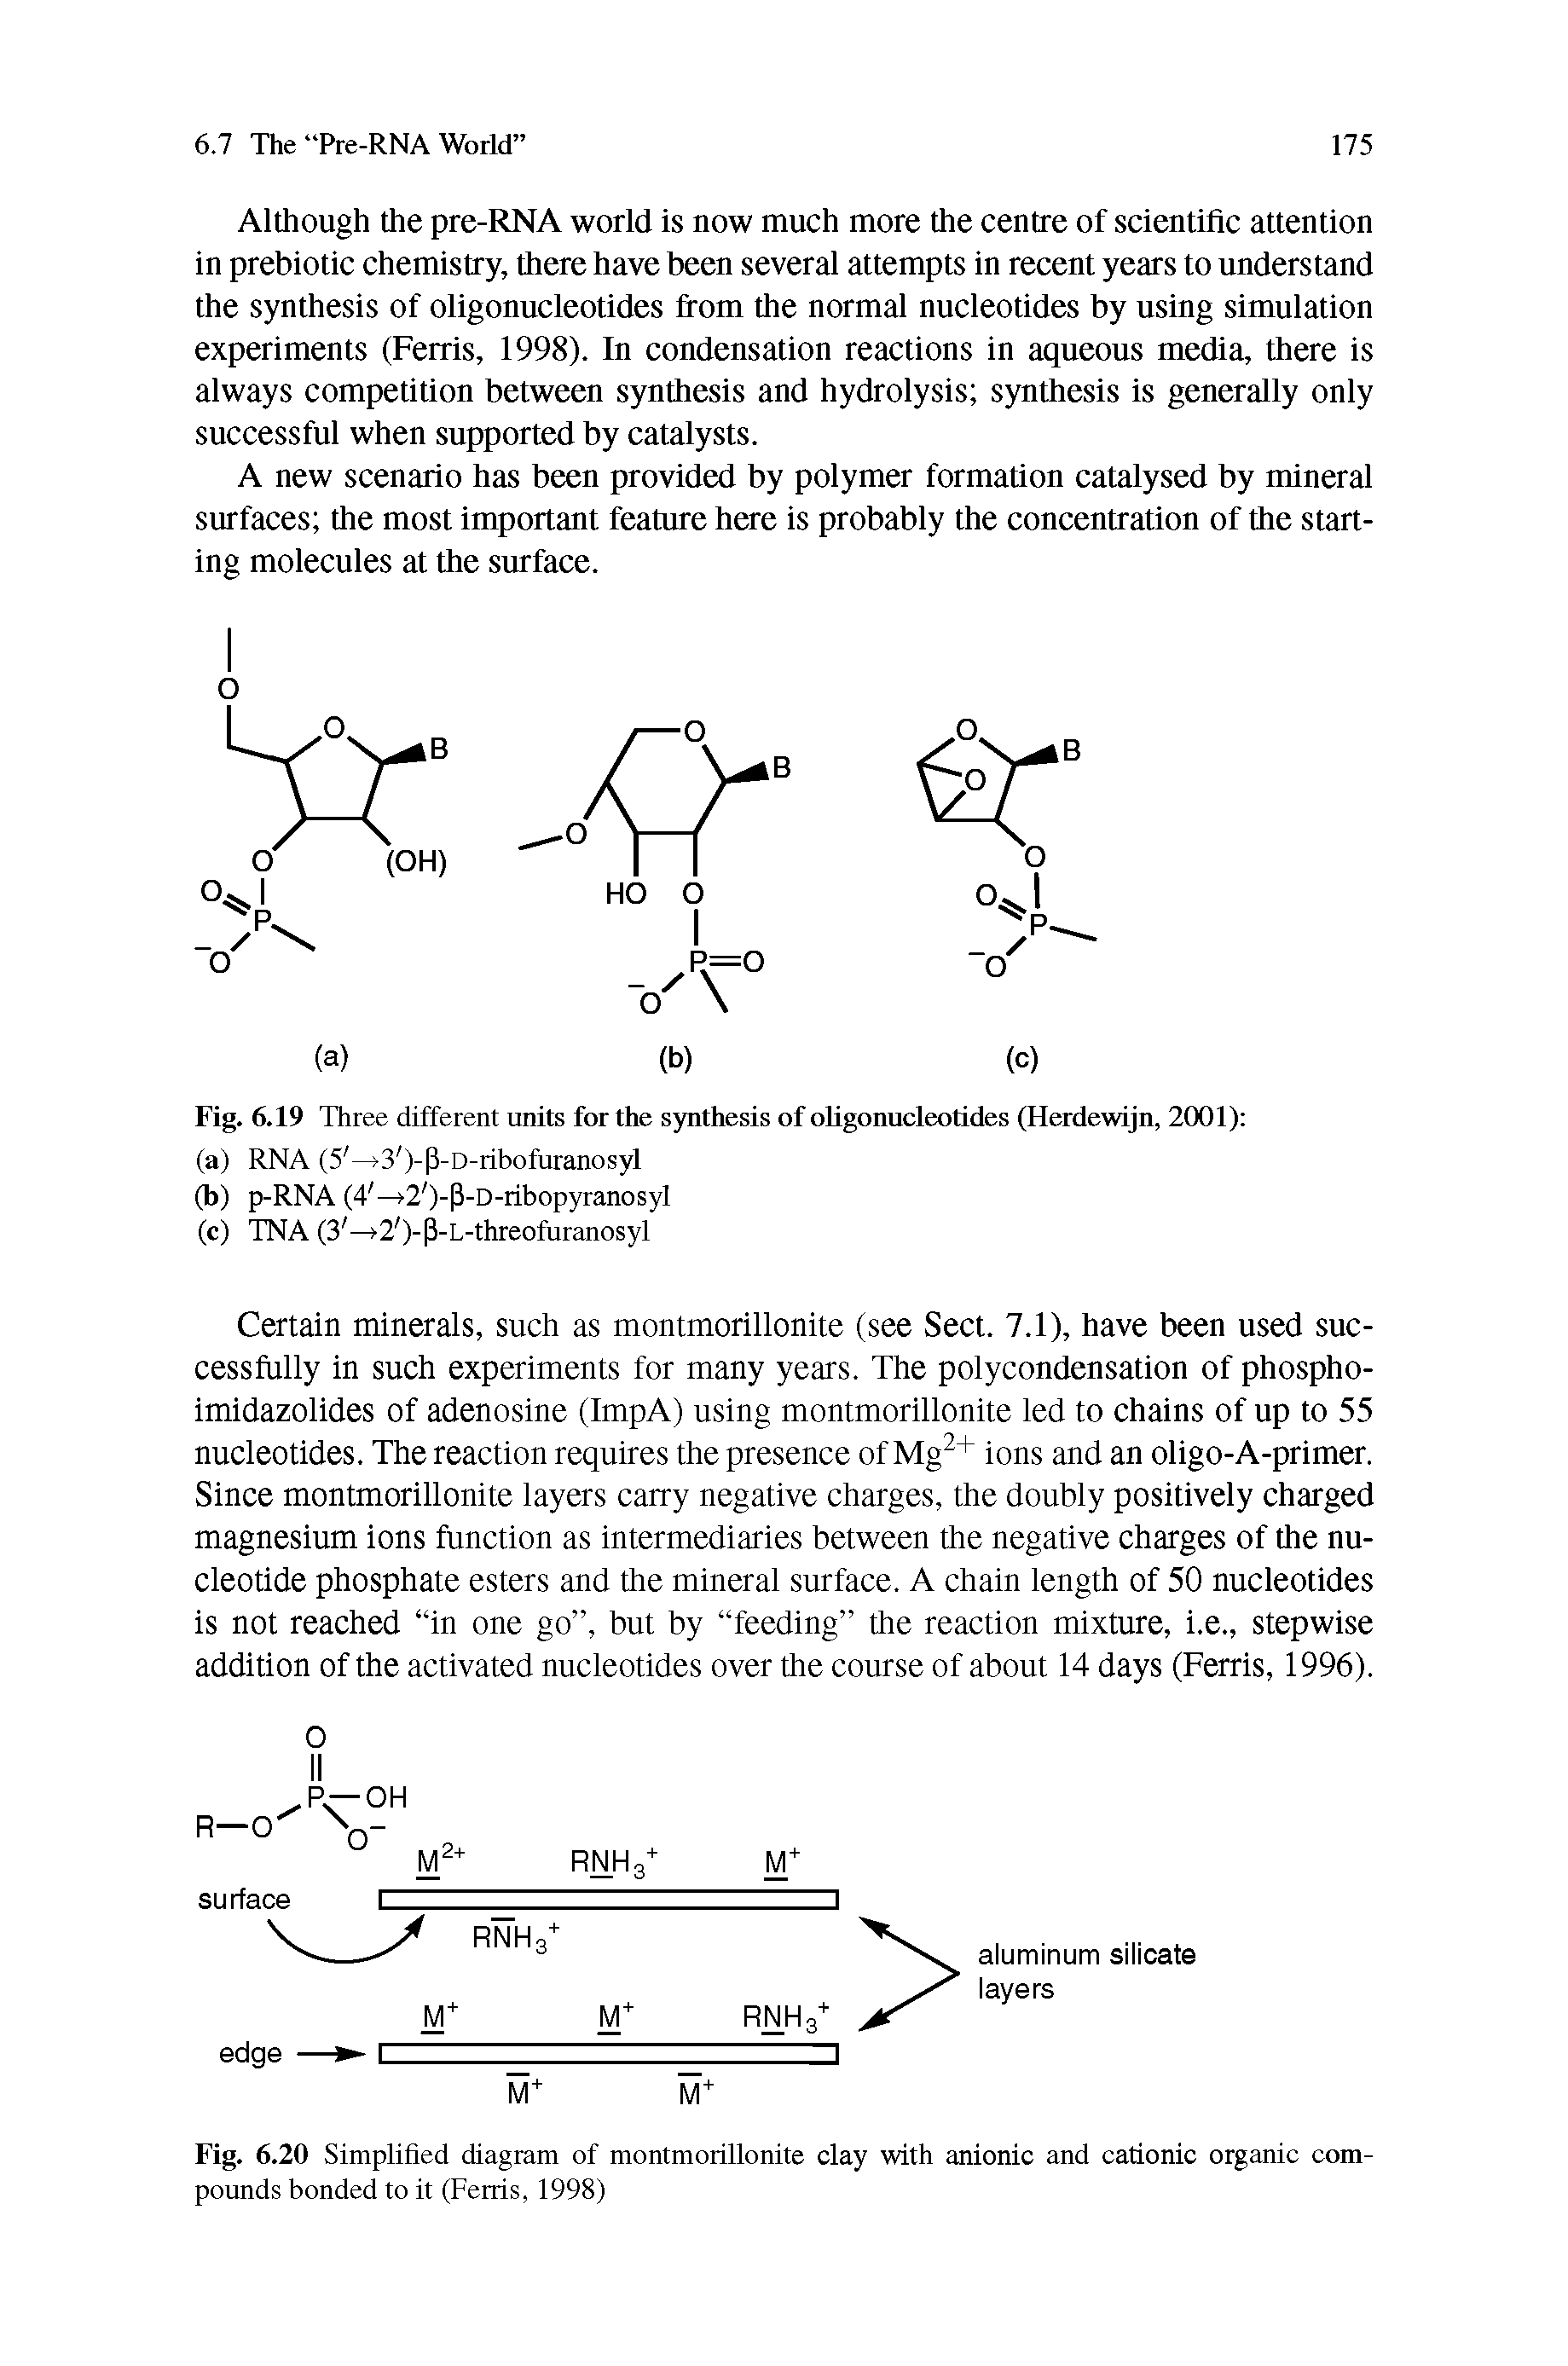 Fig. 6.20 Simplified diagram of montmorillonite clay with anionic and cationic organic compounds bonded to it (Ferris, 1998)...